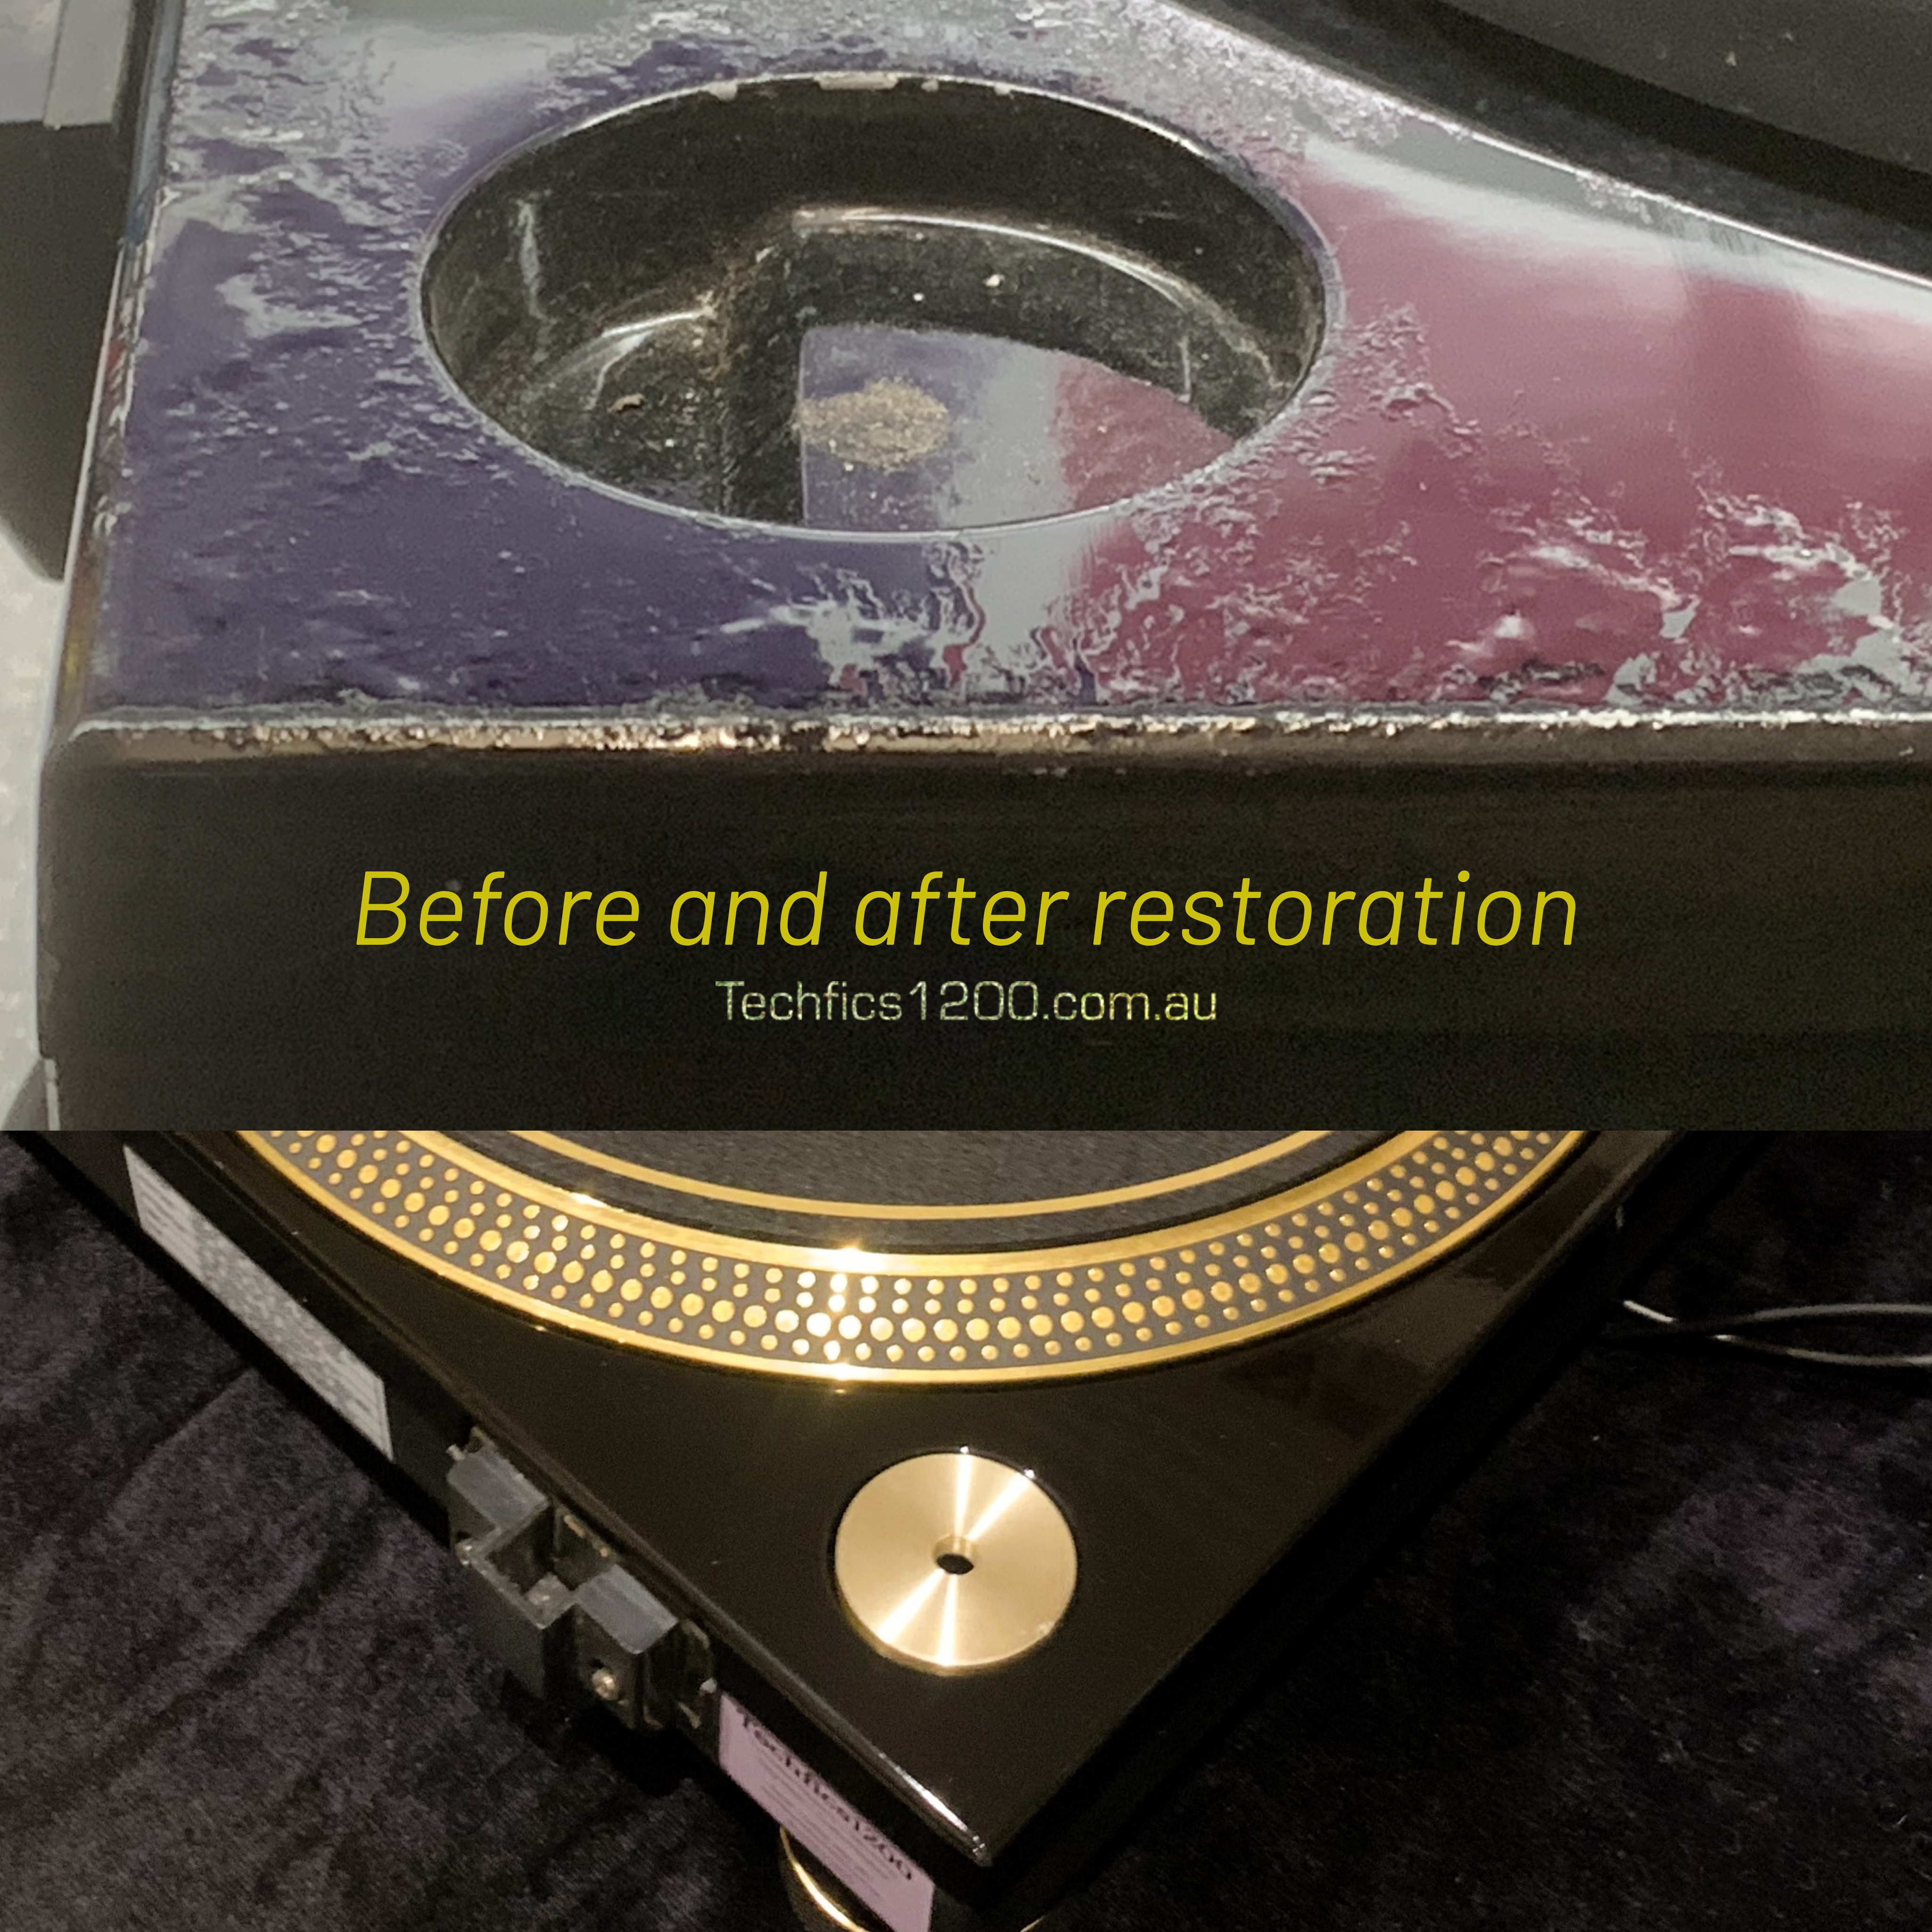 Plinth repair and re-spray, corroded or scratched alloy body..